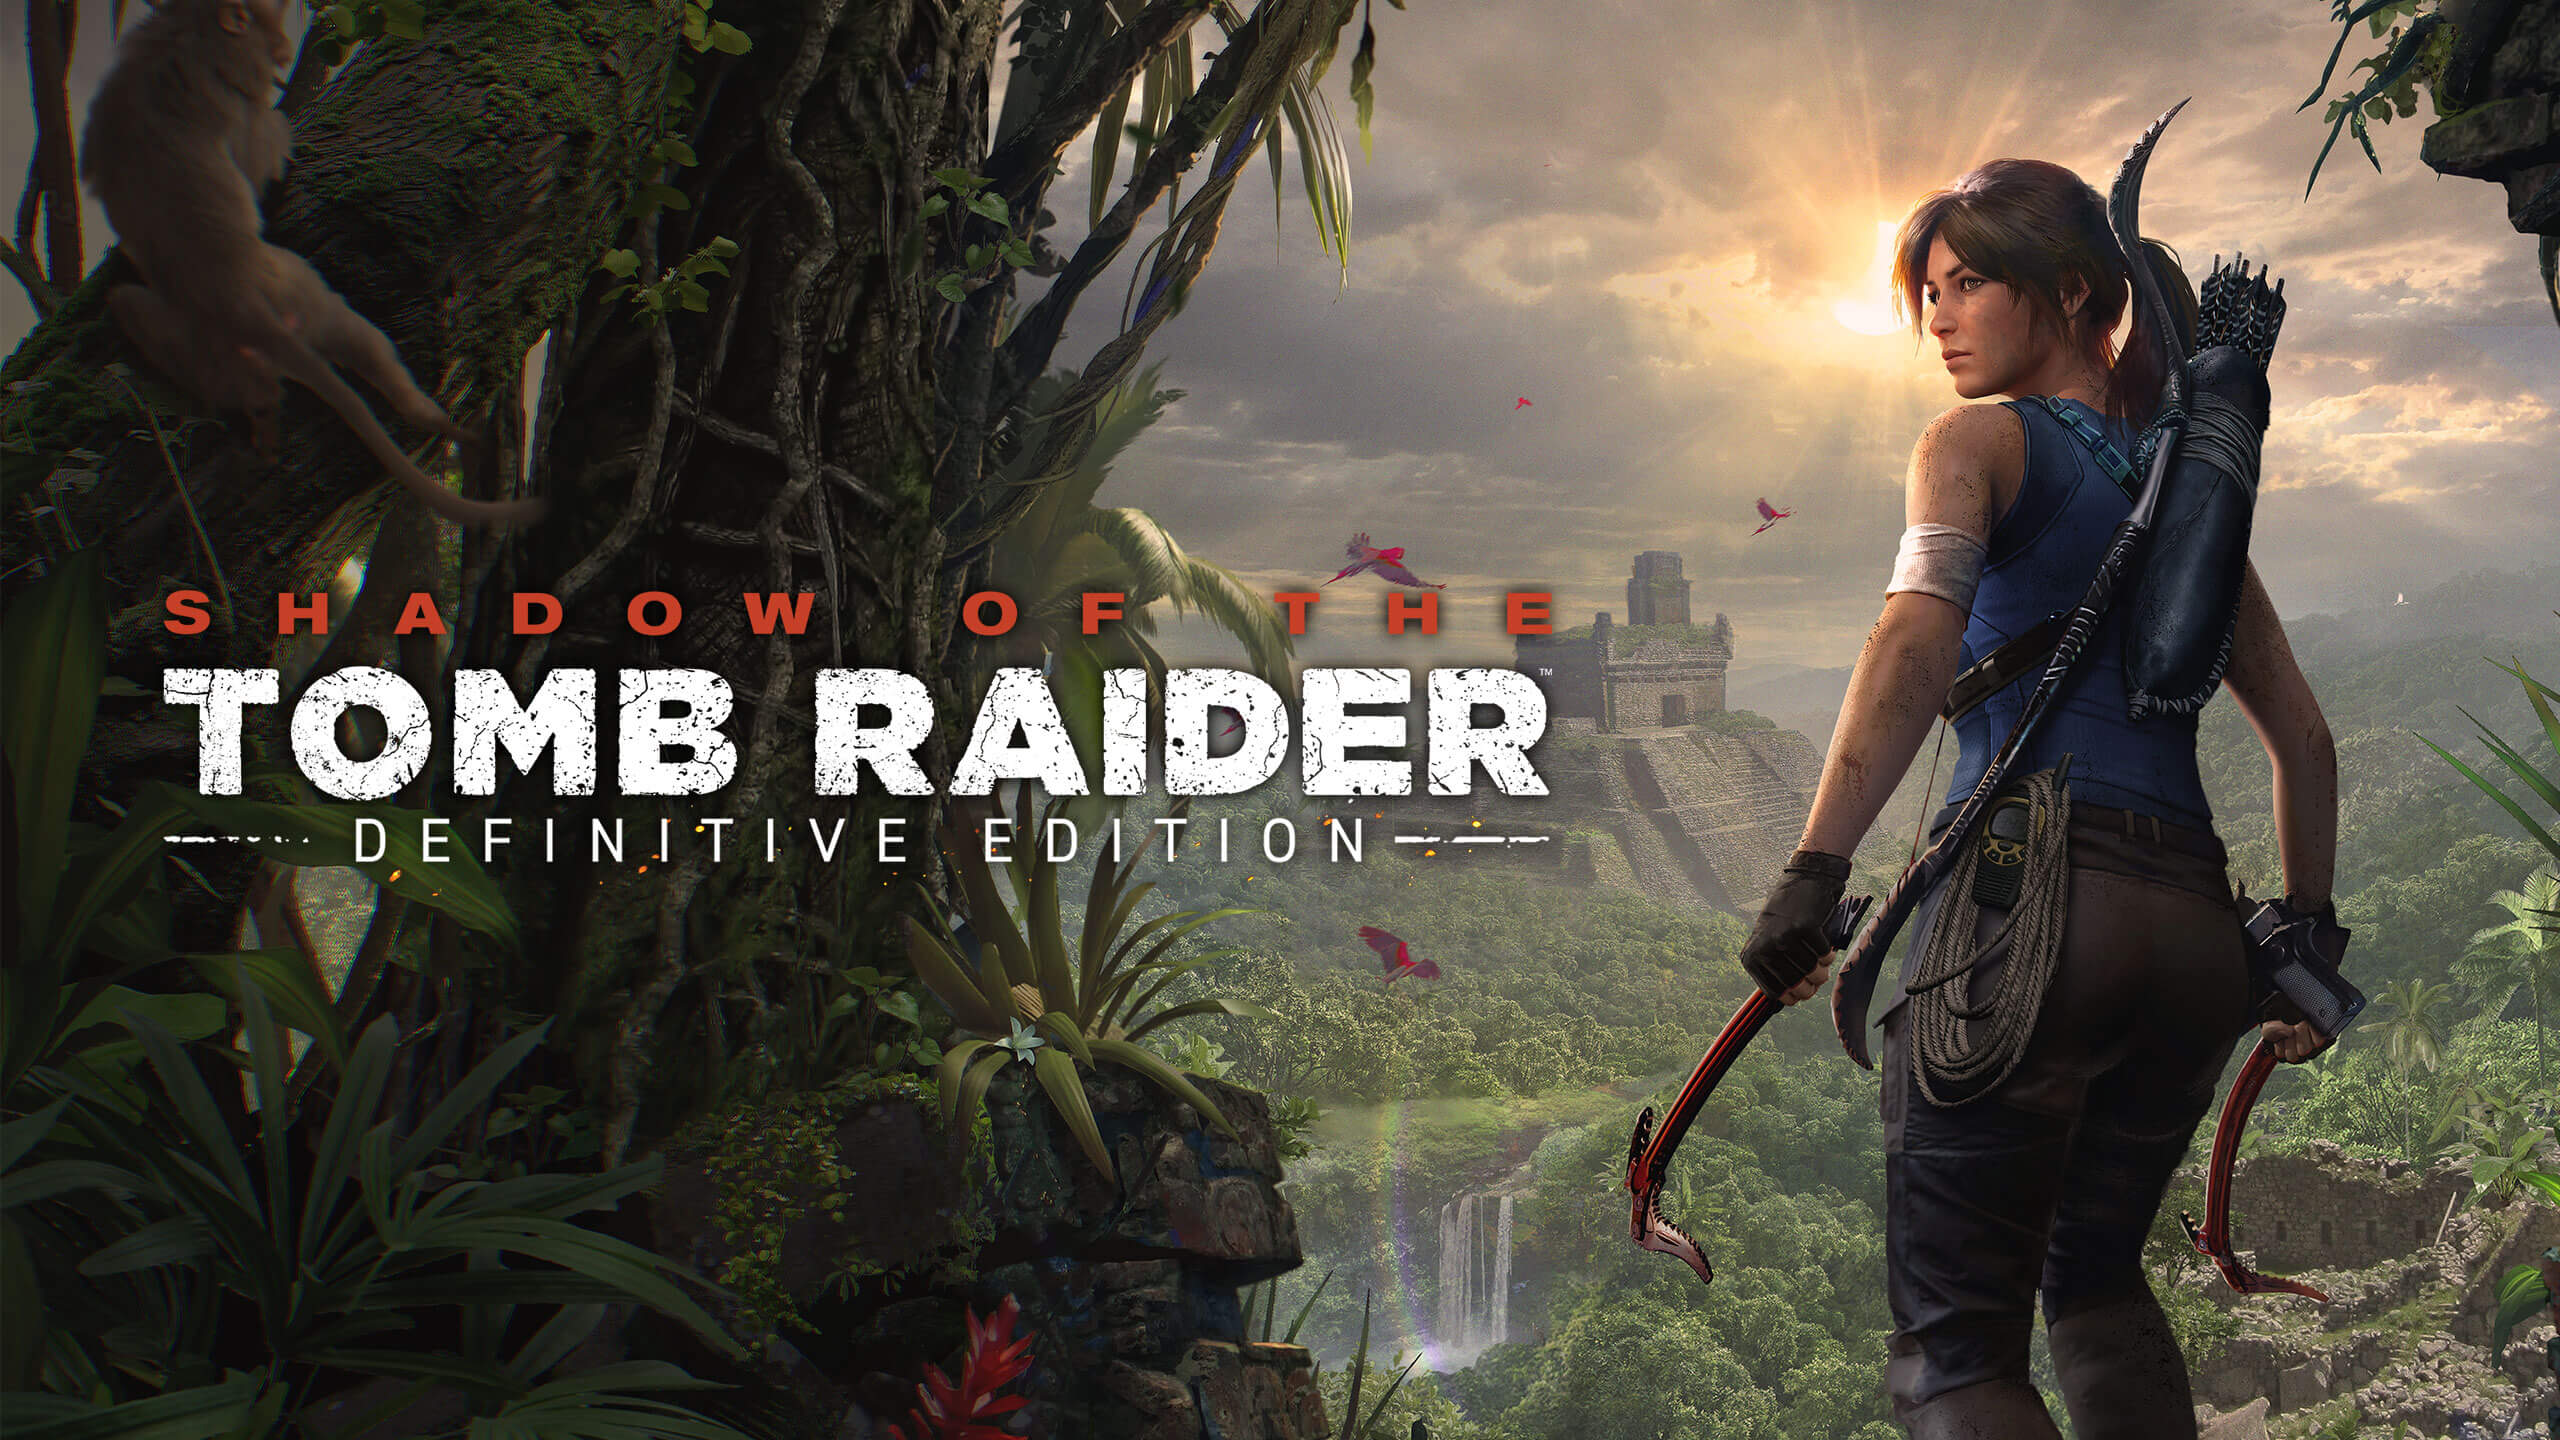 Shadow of the Tomb Raider: Definitive Edition | Download and Buy Today - Epic Games Store